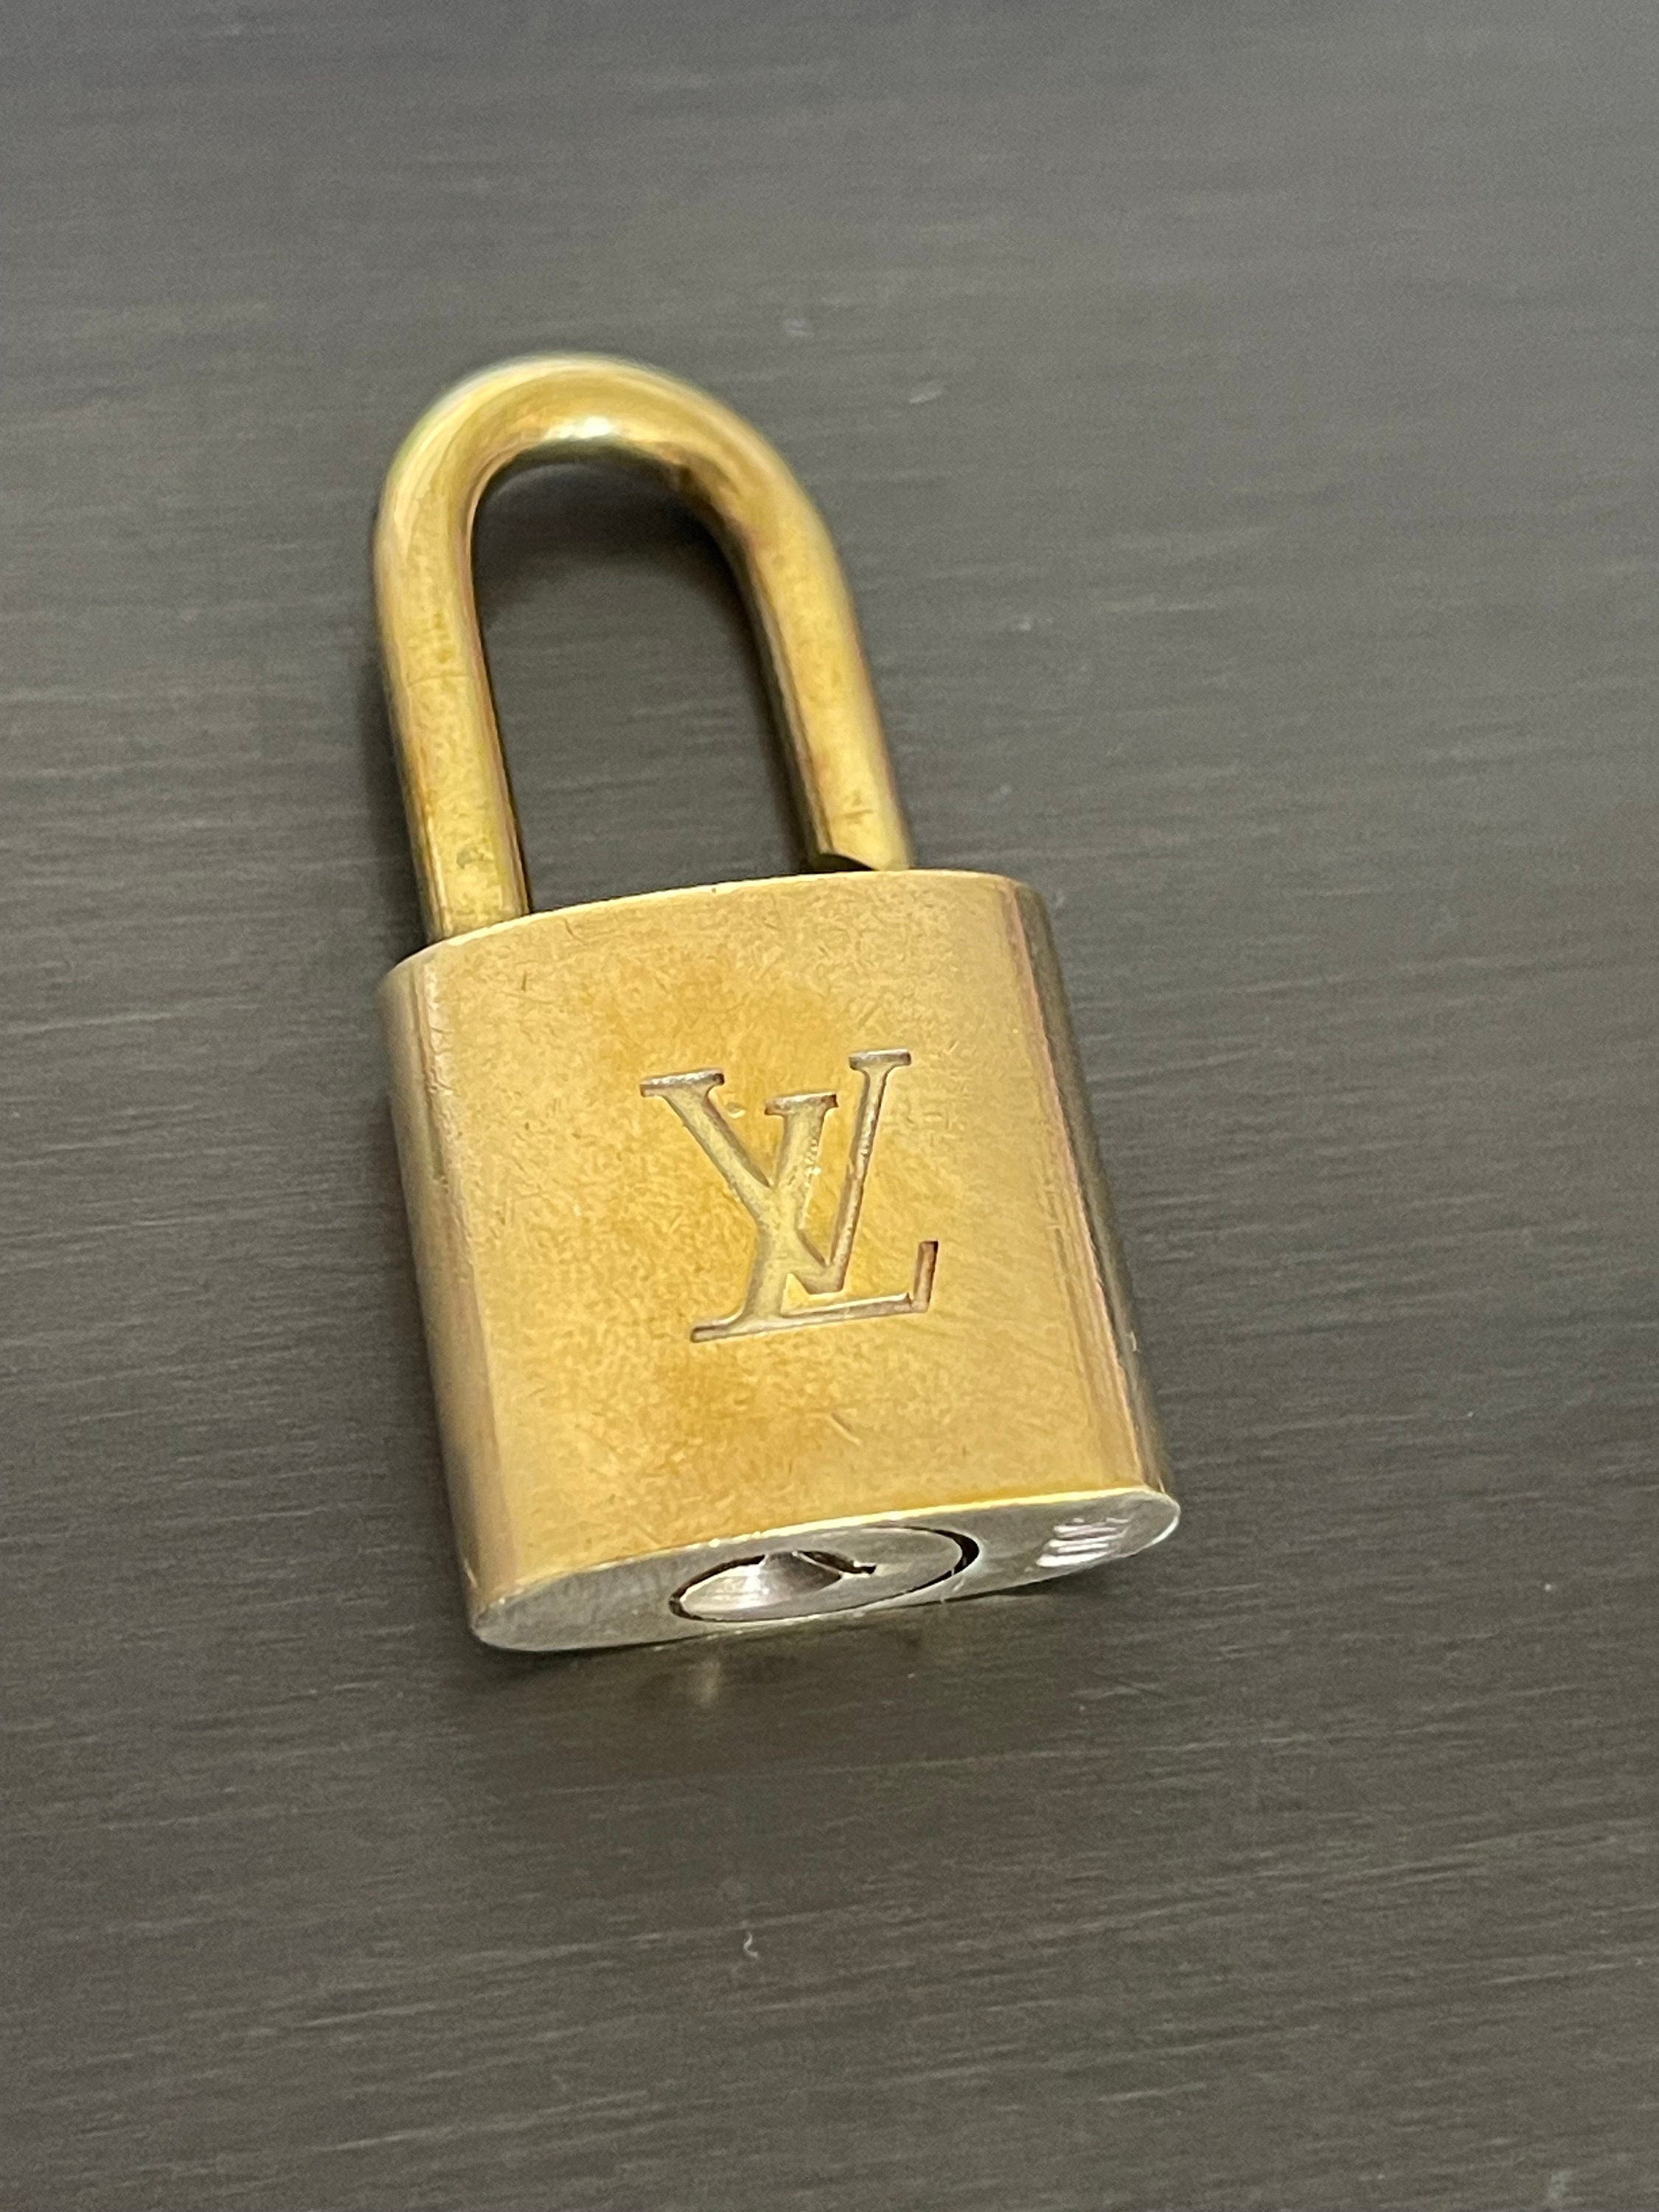 Pinkerly Special Louis Vuitton Padlock and One Key 309 Lock 